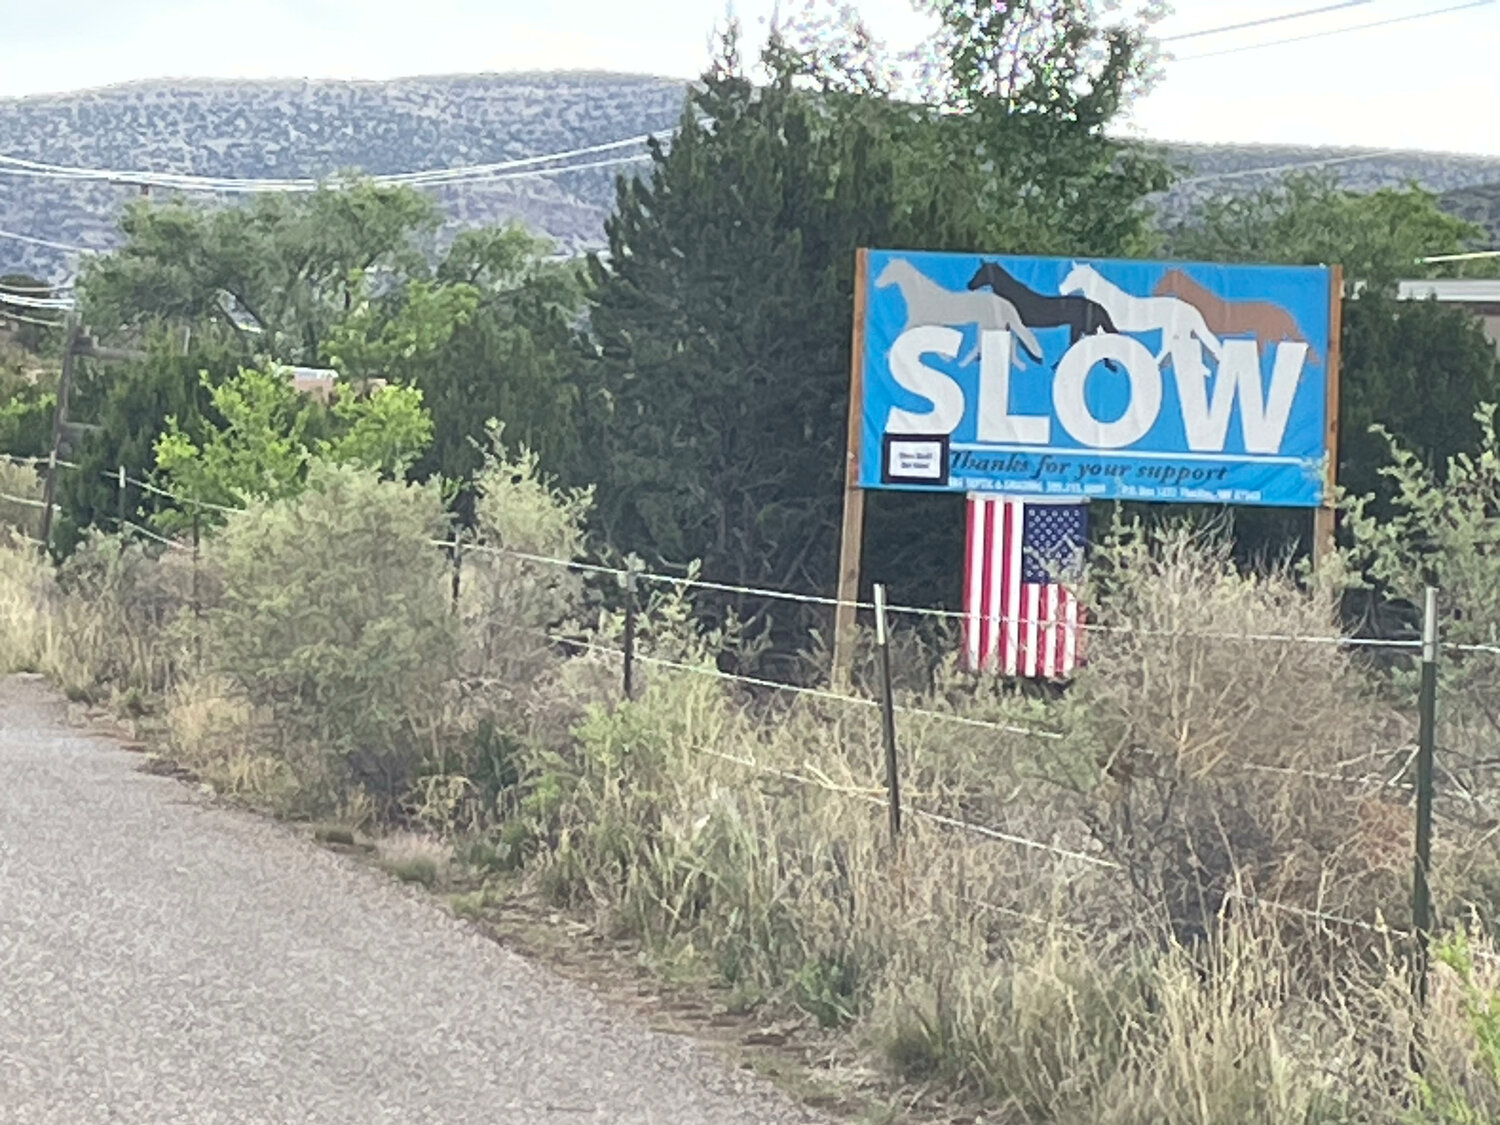 A sign along NM 165 in Placitas urges people to slow down. Andoval County is considering an ordinance to ban the feeding of wild horses after three horses have been struck by vehicles and killed in the last two years. (T.S. Last/Sandoval Signpost)